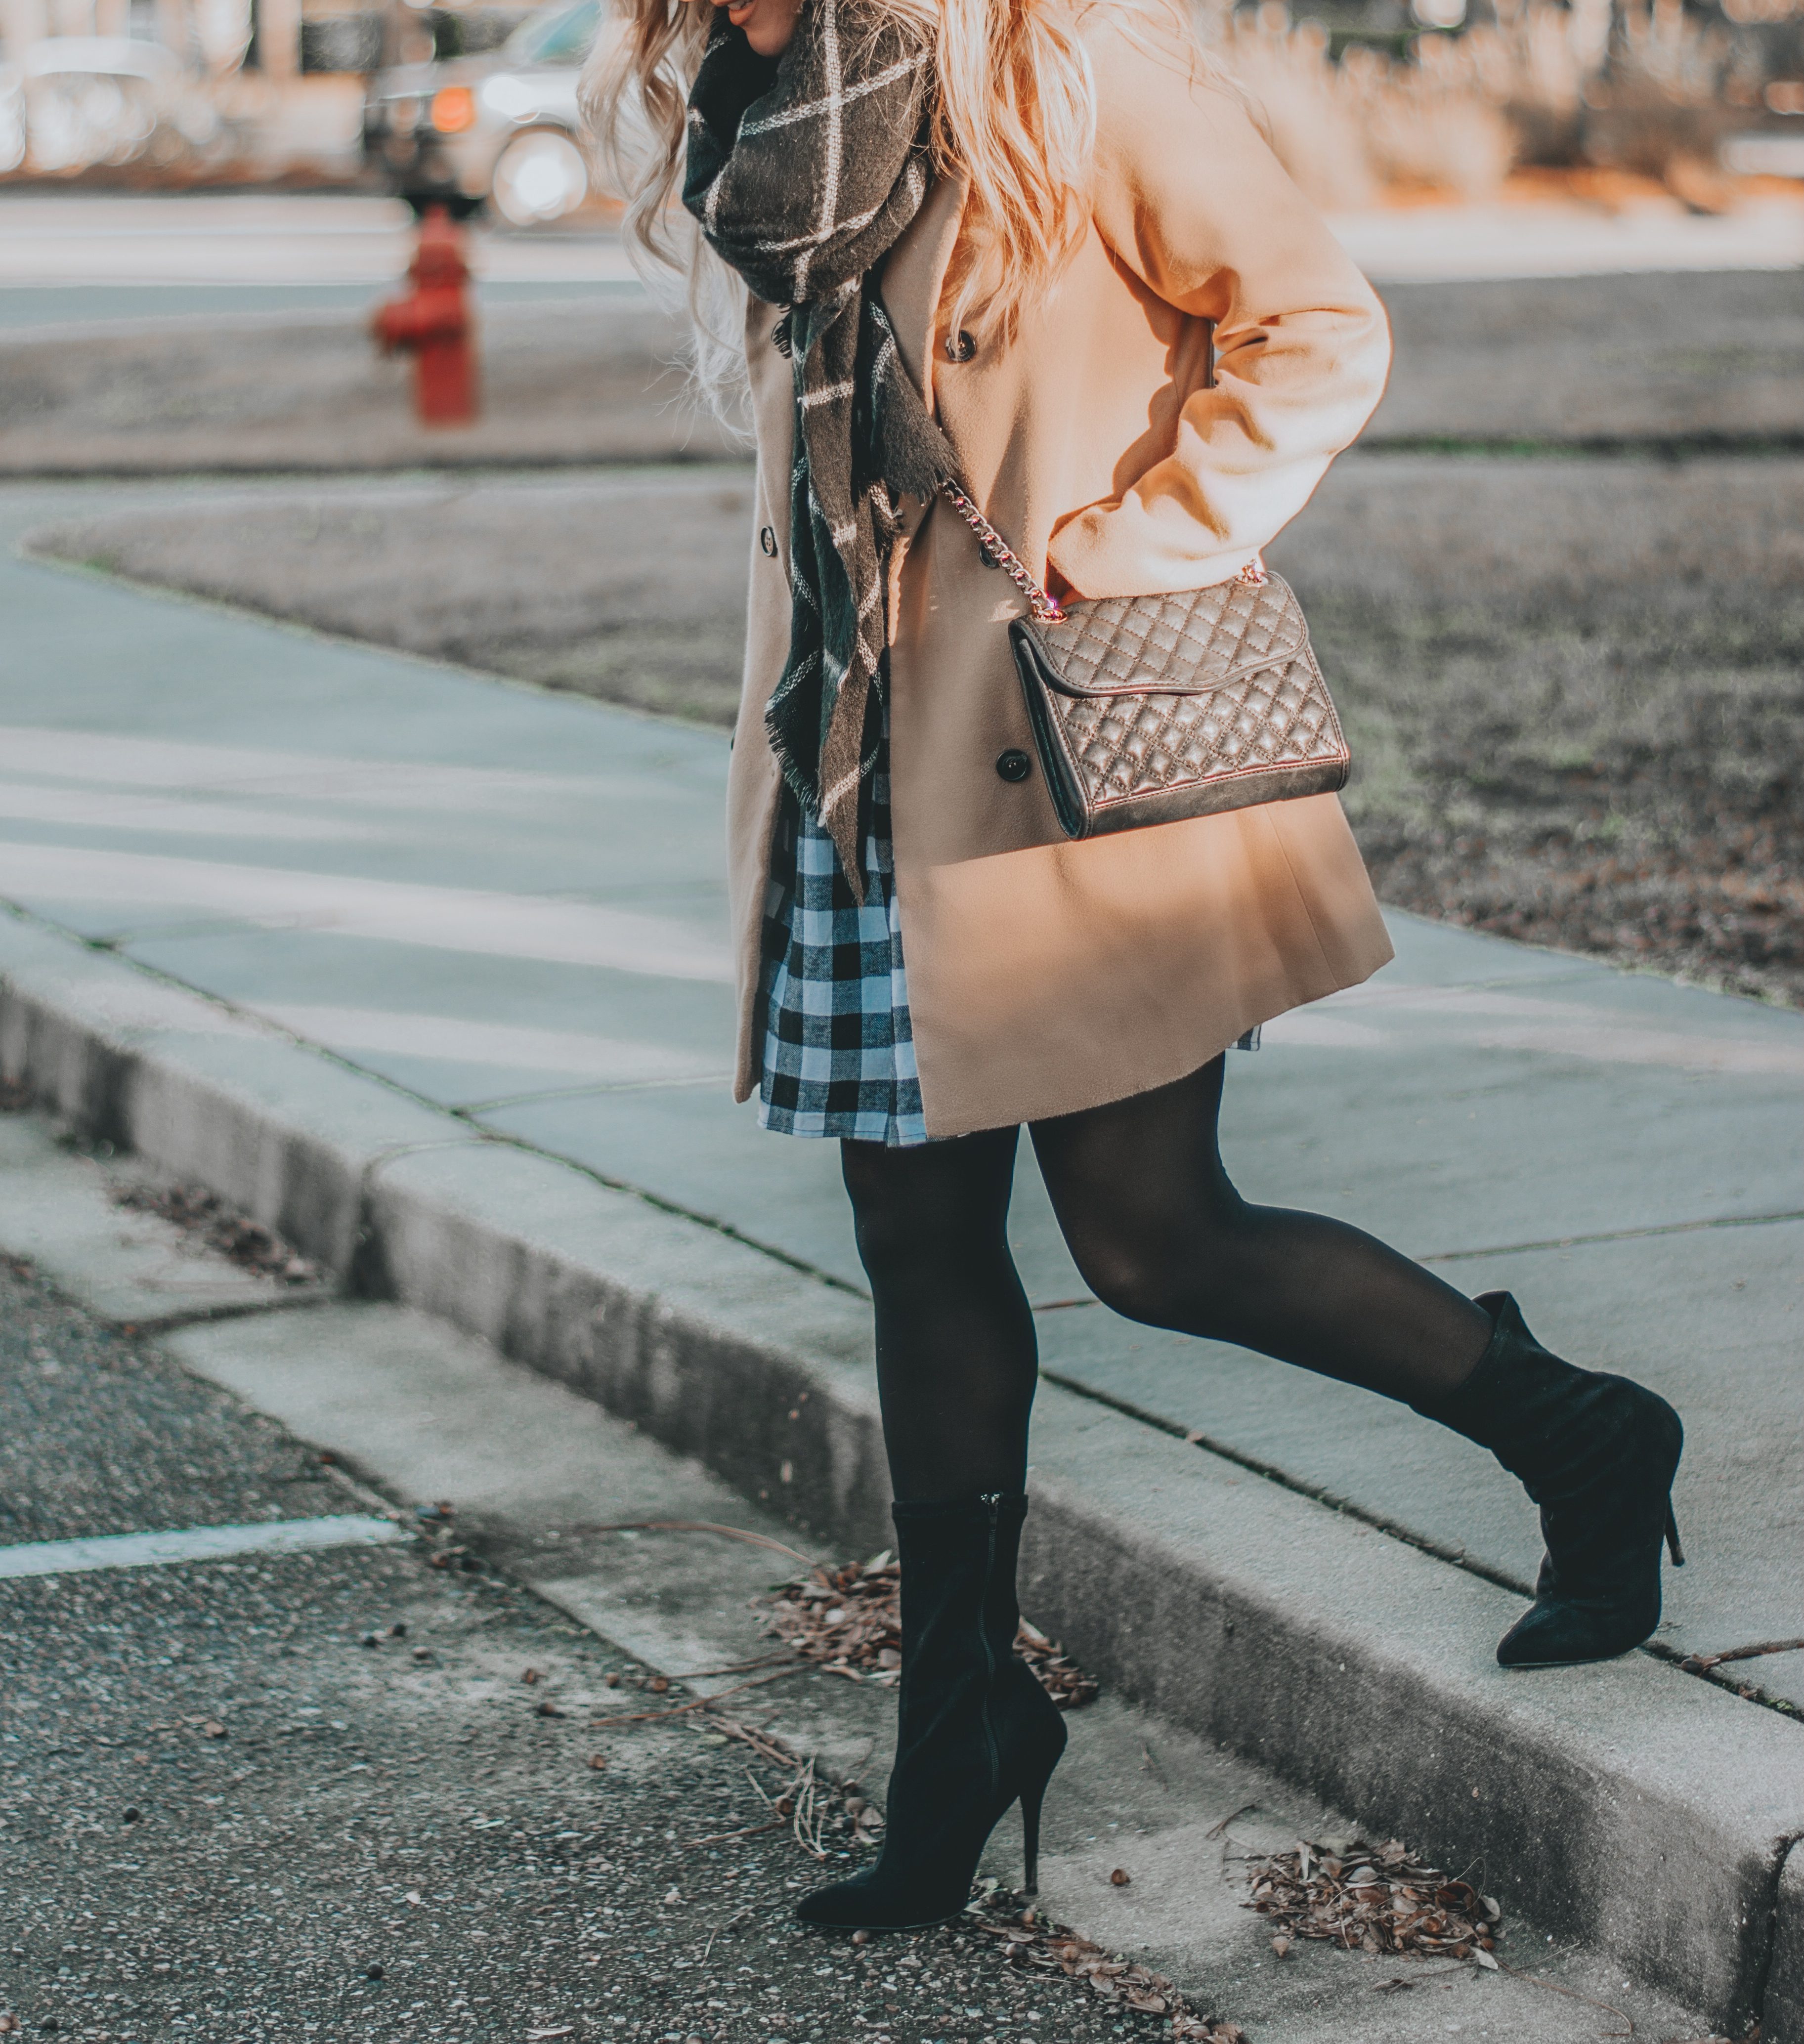 New Year, New Goals | What I Plan to Focus on in 2019 : sharing my budget friendly black and white plaid dress and camel coat ootd, as well as my 2019 new year goals. BreeAtLast.com